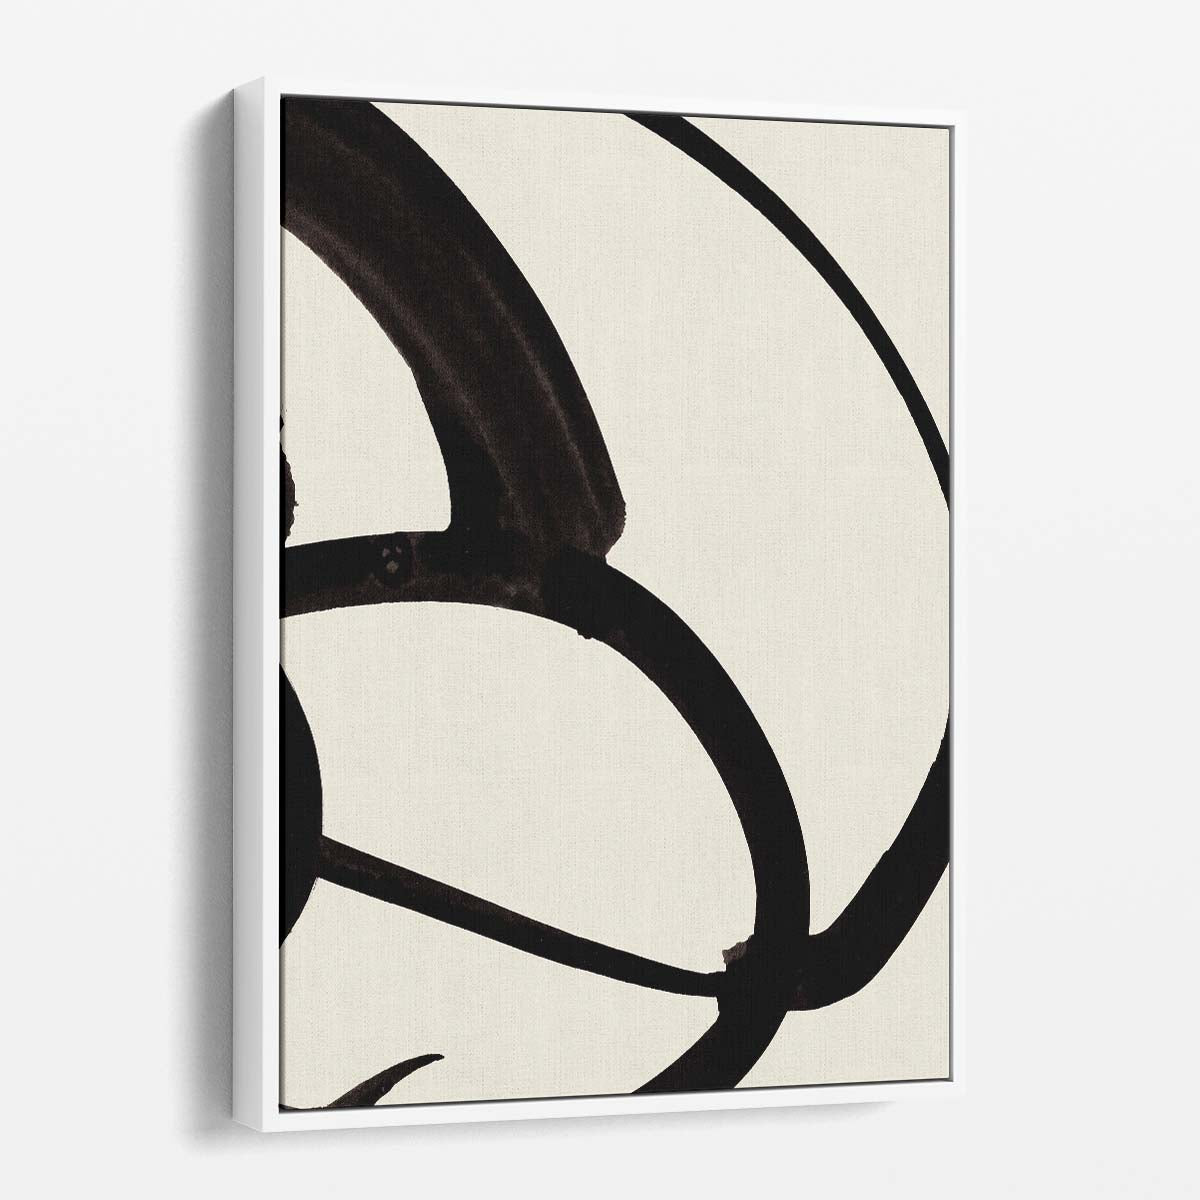 Dan Hobday's Minimalistic Abstract Geometric Illustration Atienne No2 by Luxuriance Designs, made in USA